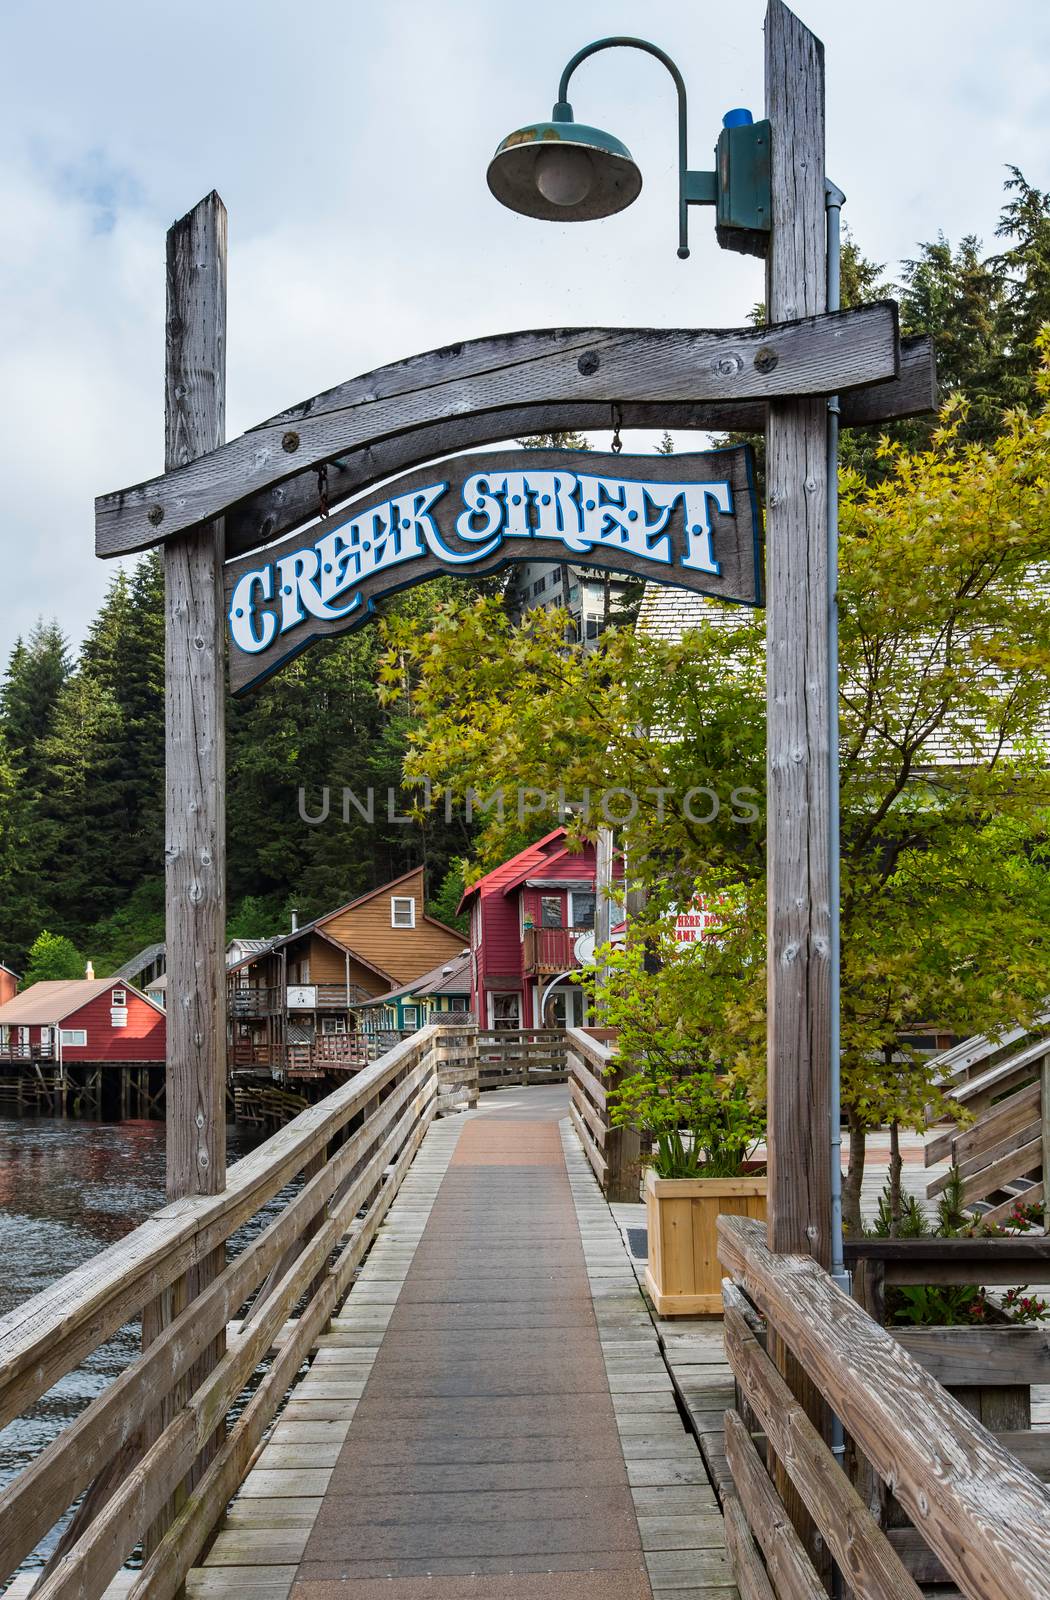 KETCHIKAN, AK - MAY 15: Entry sign to walkway and historic buildings on Creek Street on May 15, 2016 in Ketchikan, AK.